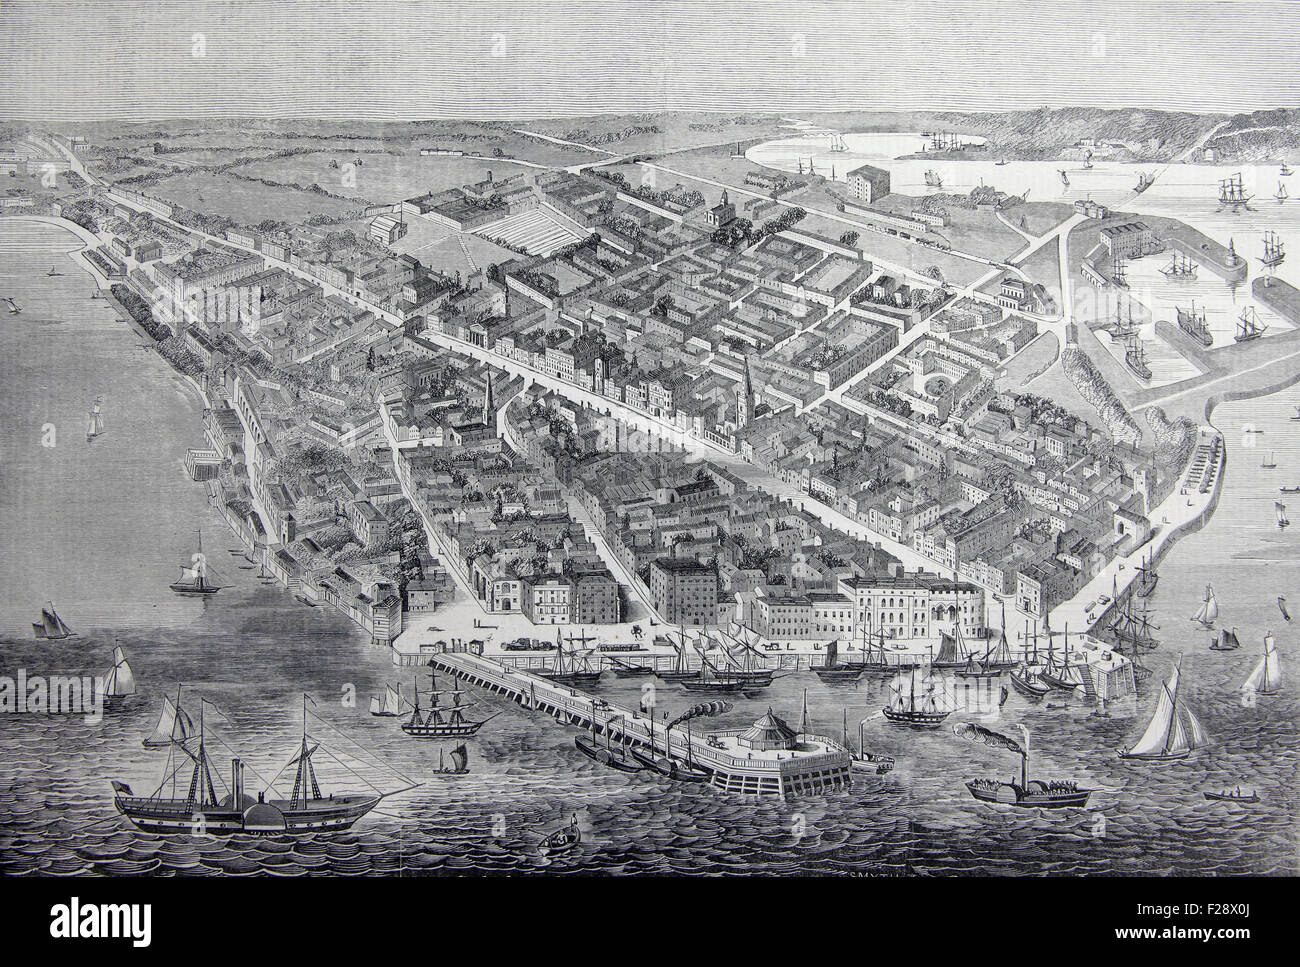 Southampton in the mid 19th Century, Illustrated London News 20th July 1844; Black and White Illustration; Stock Photo